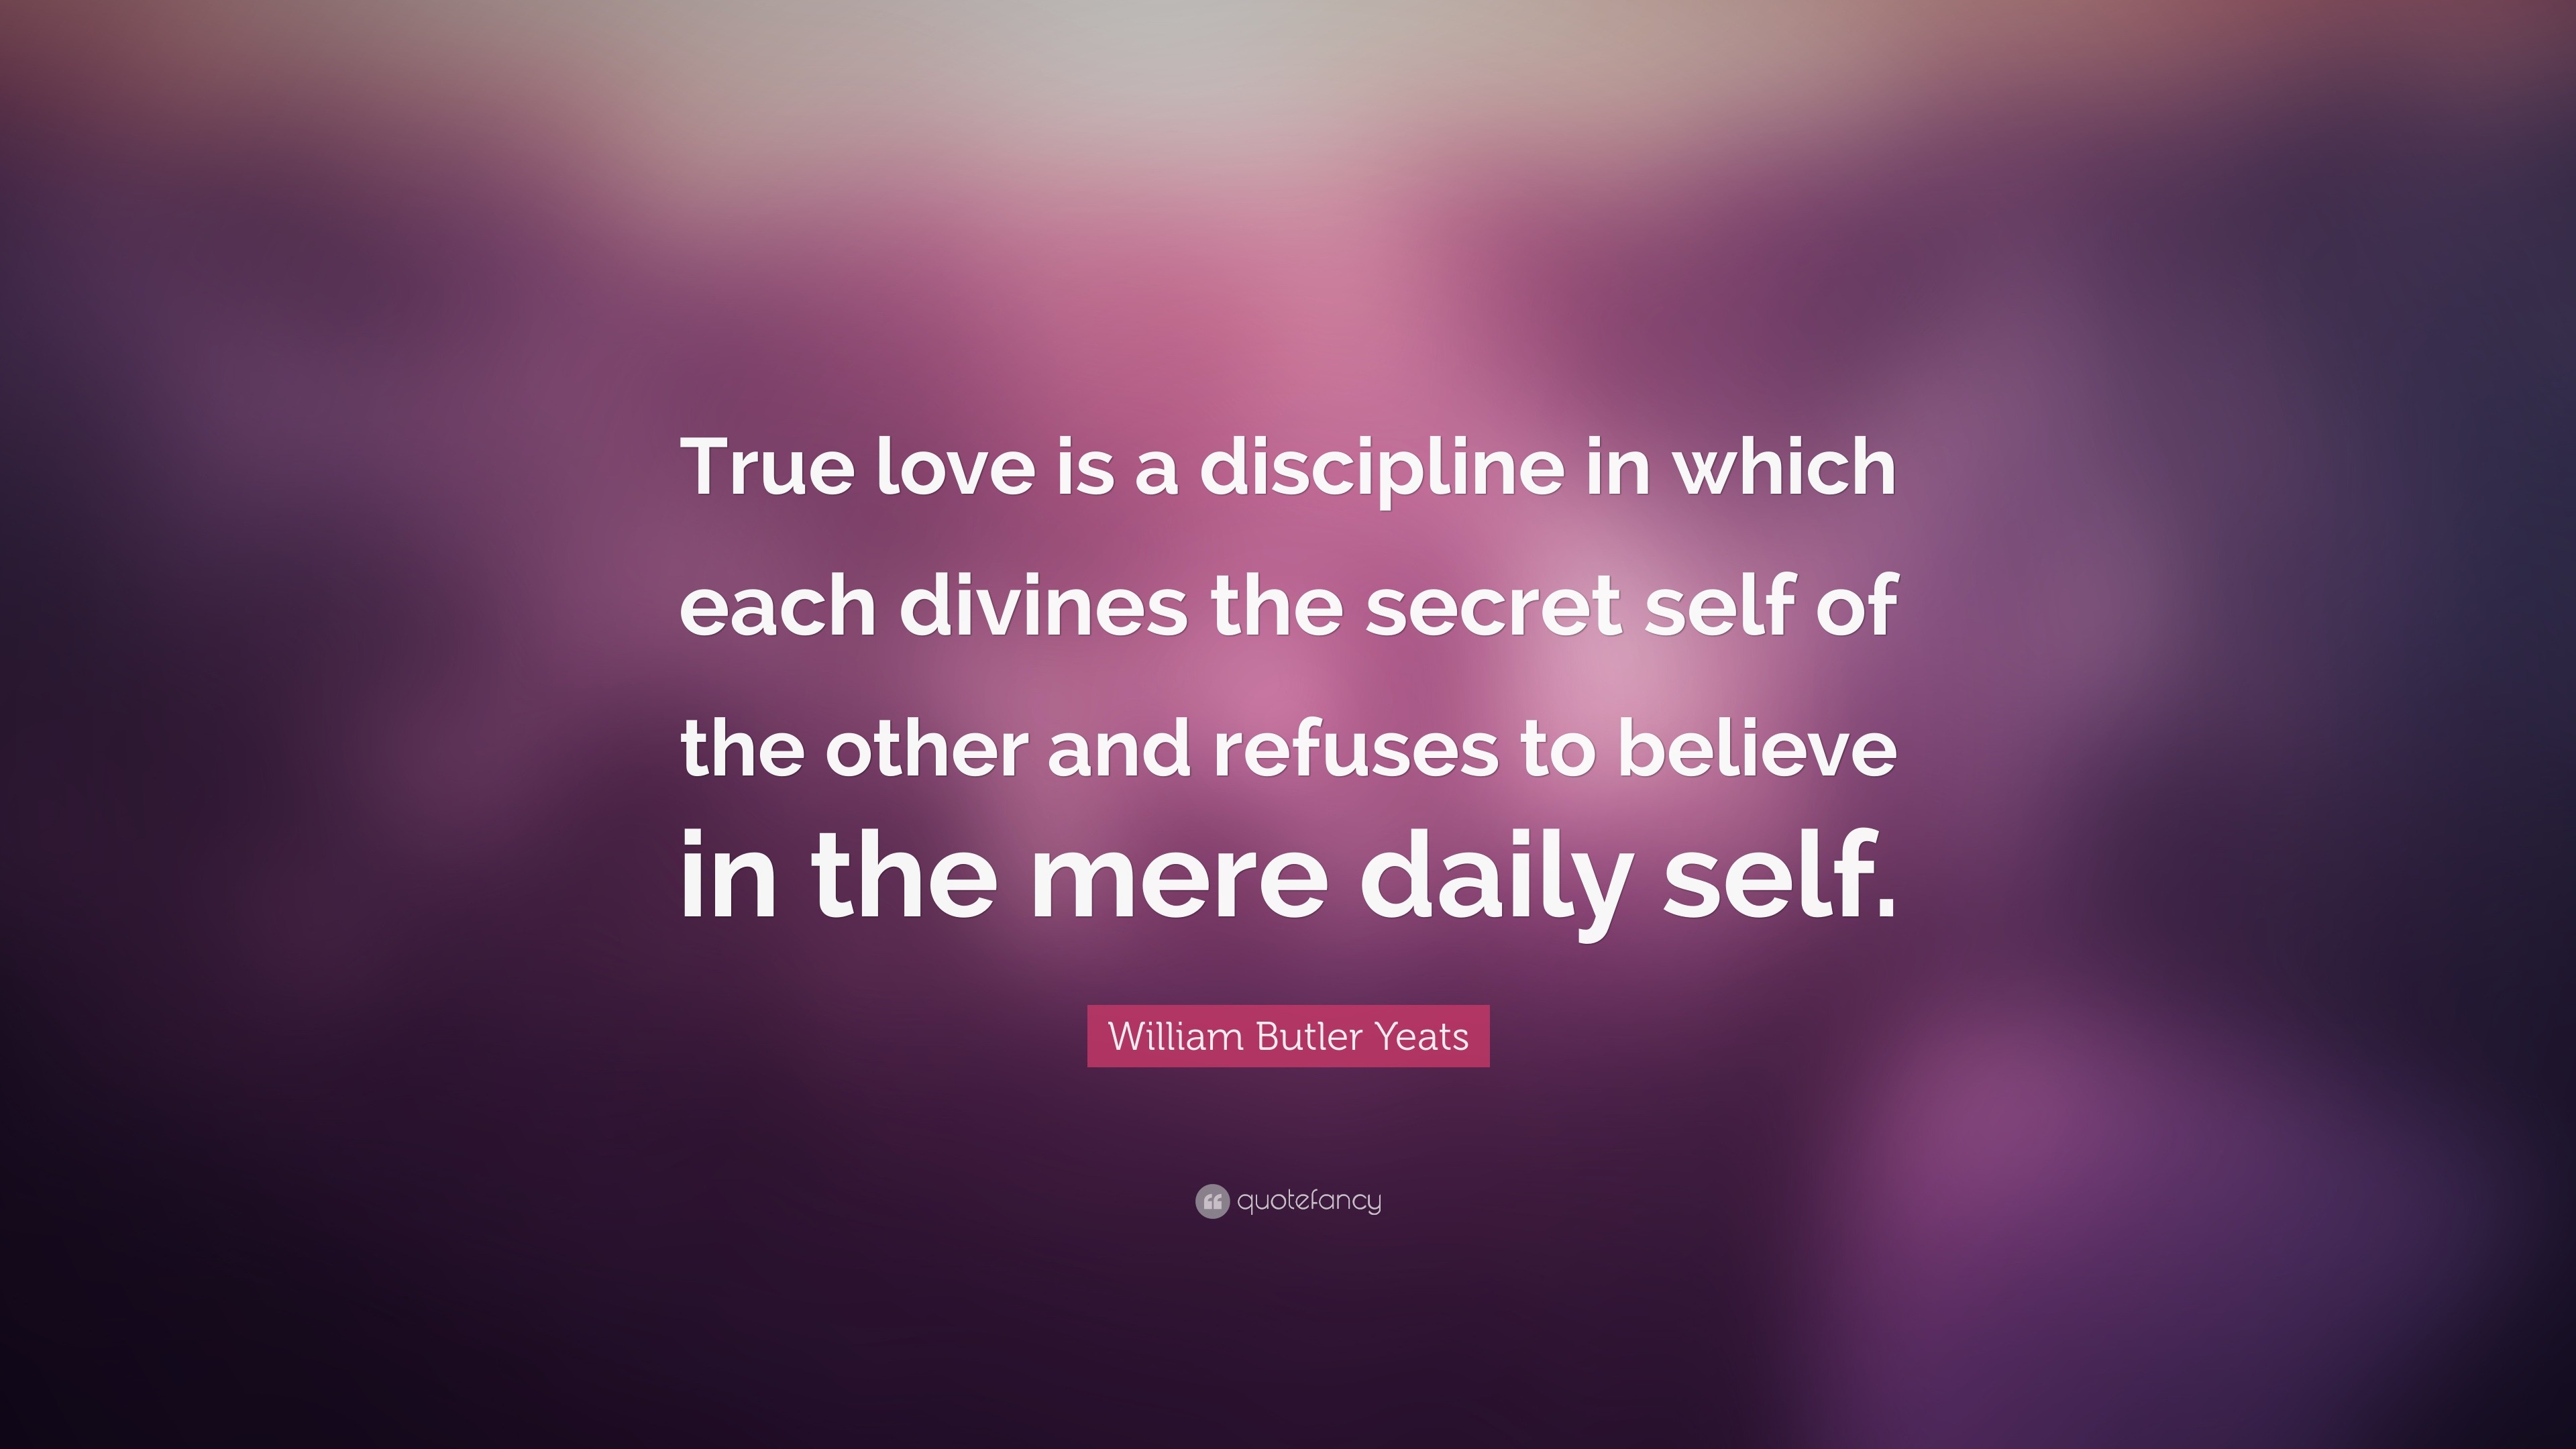 William Butler Yeats Quote “True love is a discipline in which each divines the